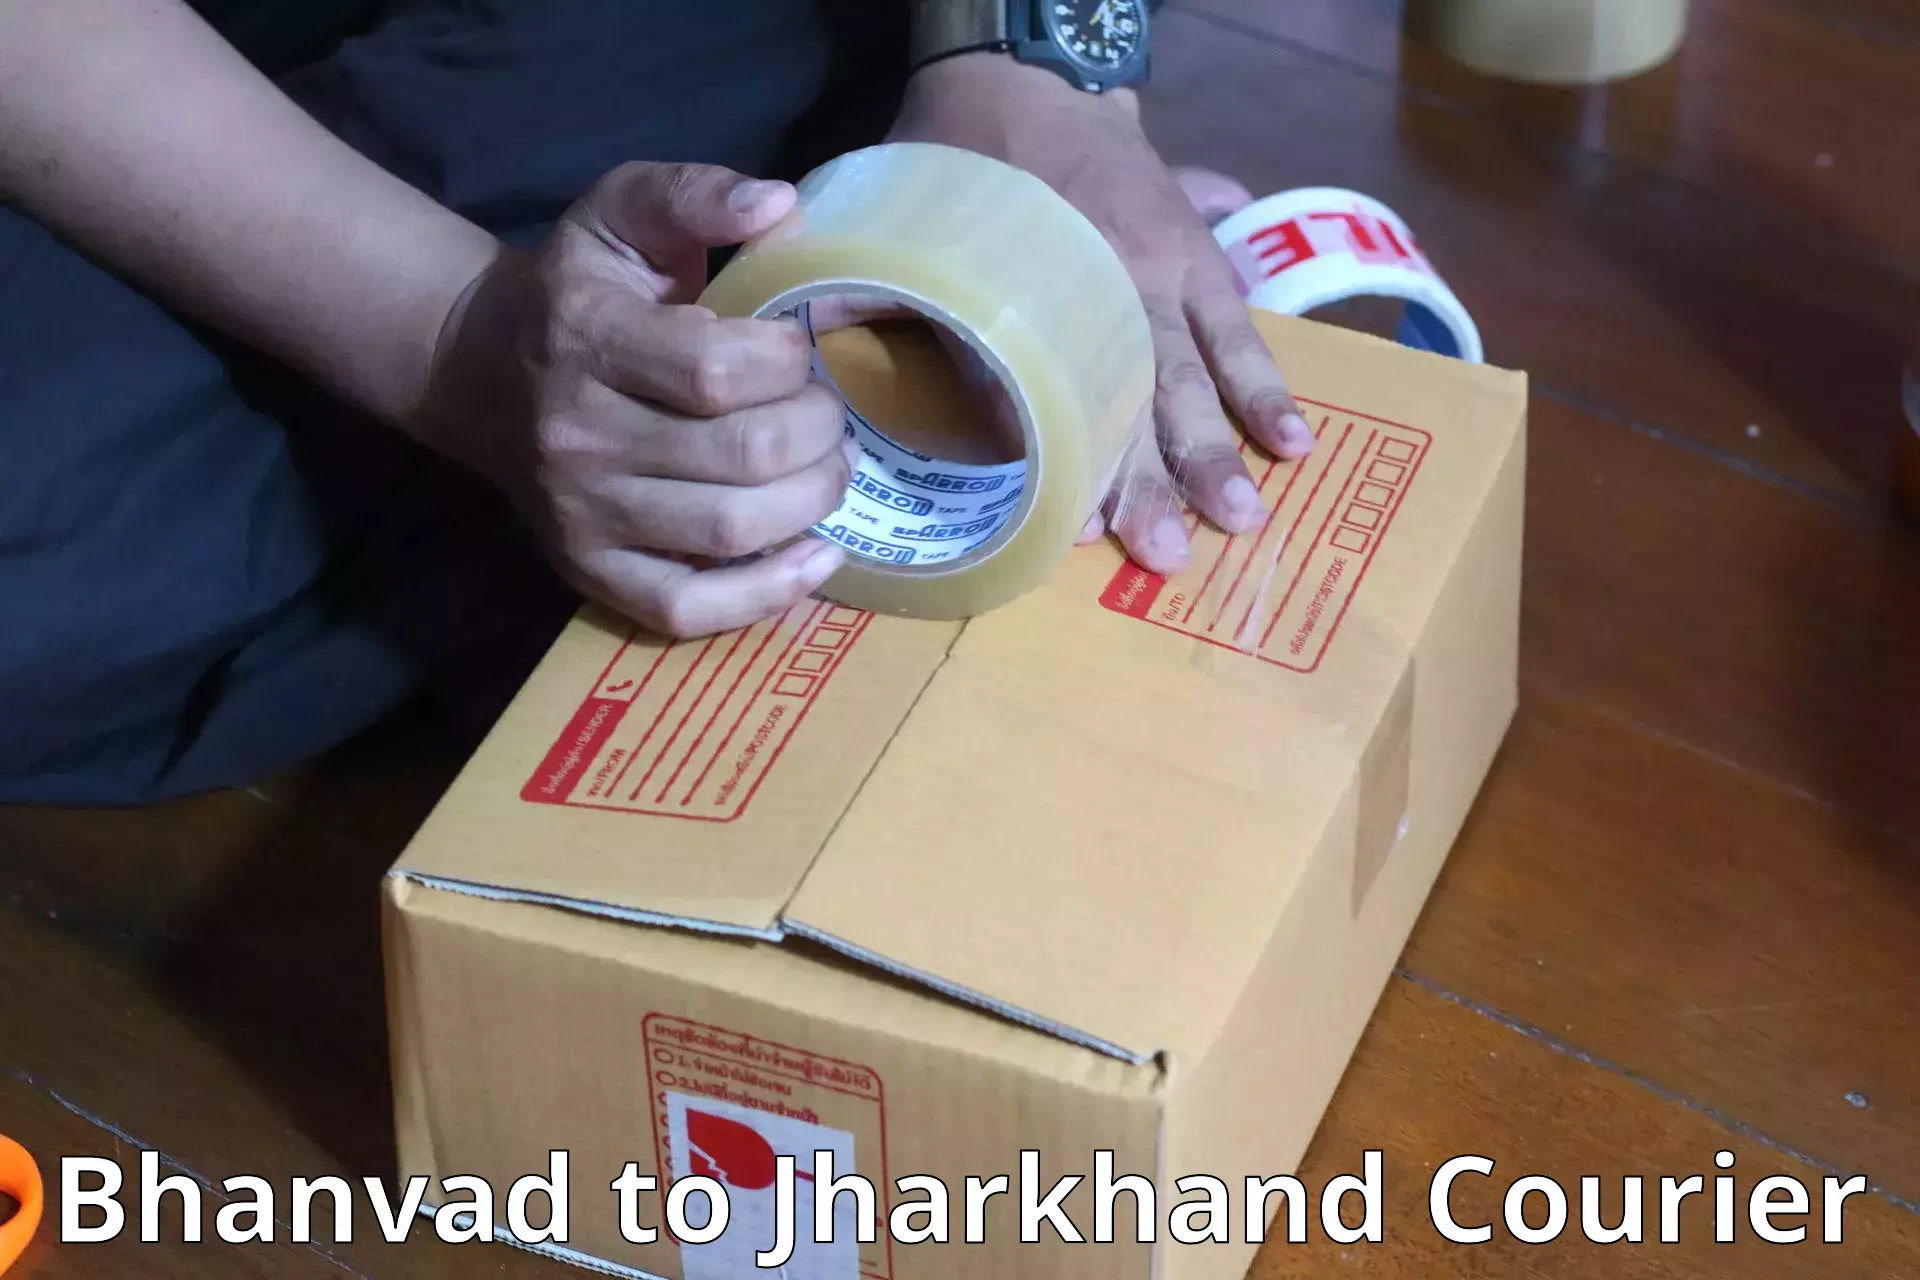 Luggage shipment processing Bhanvad to Jharkhand